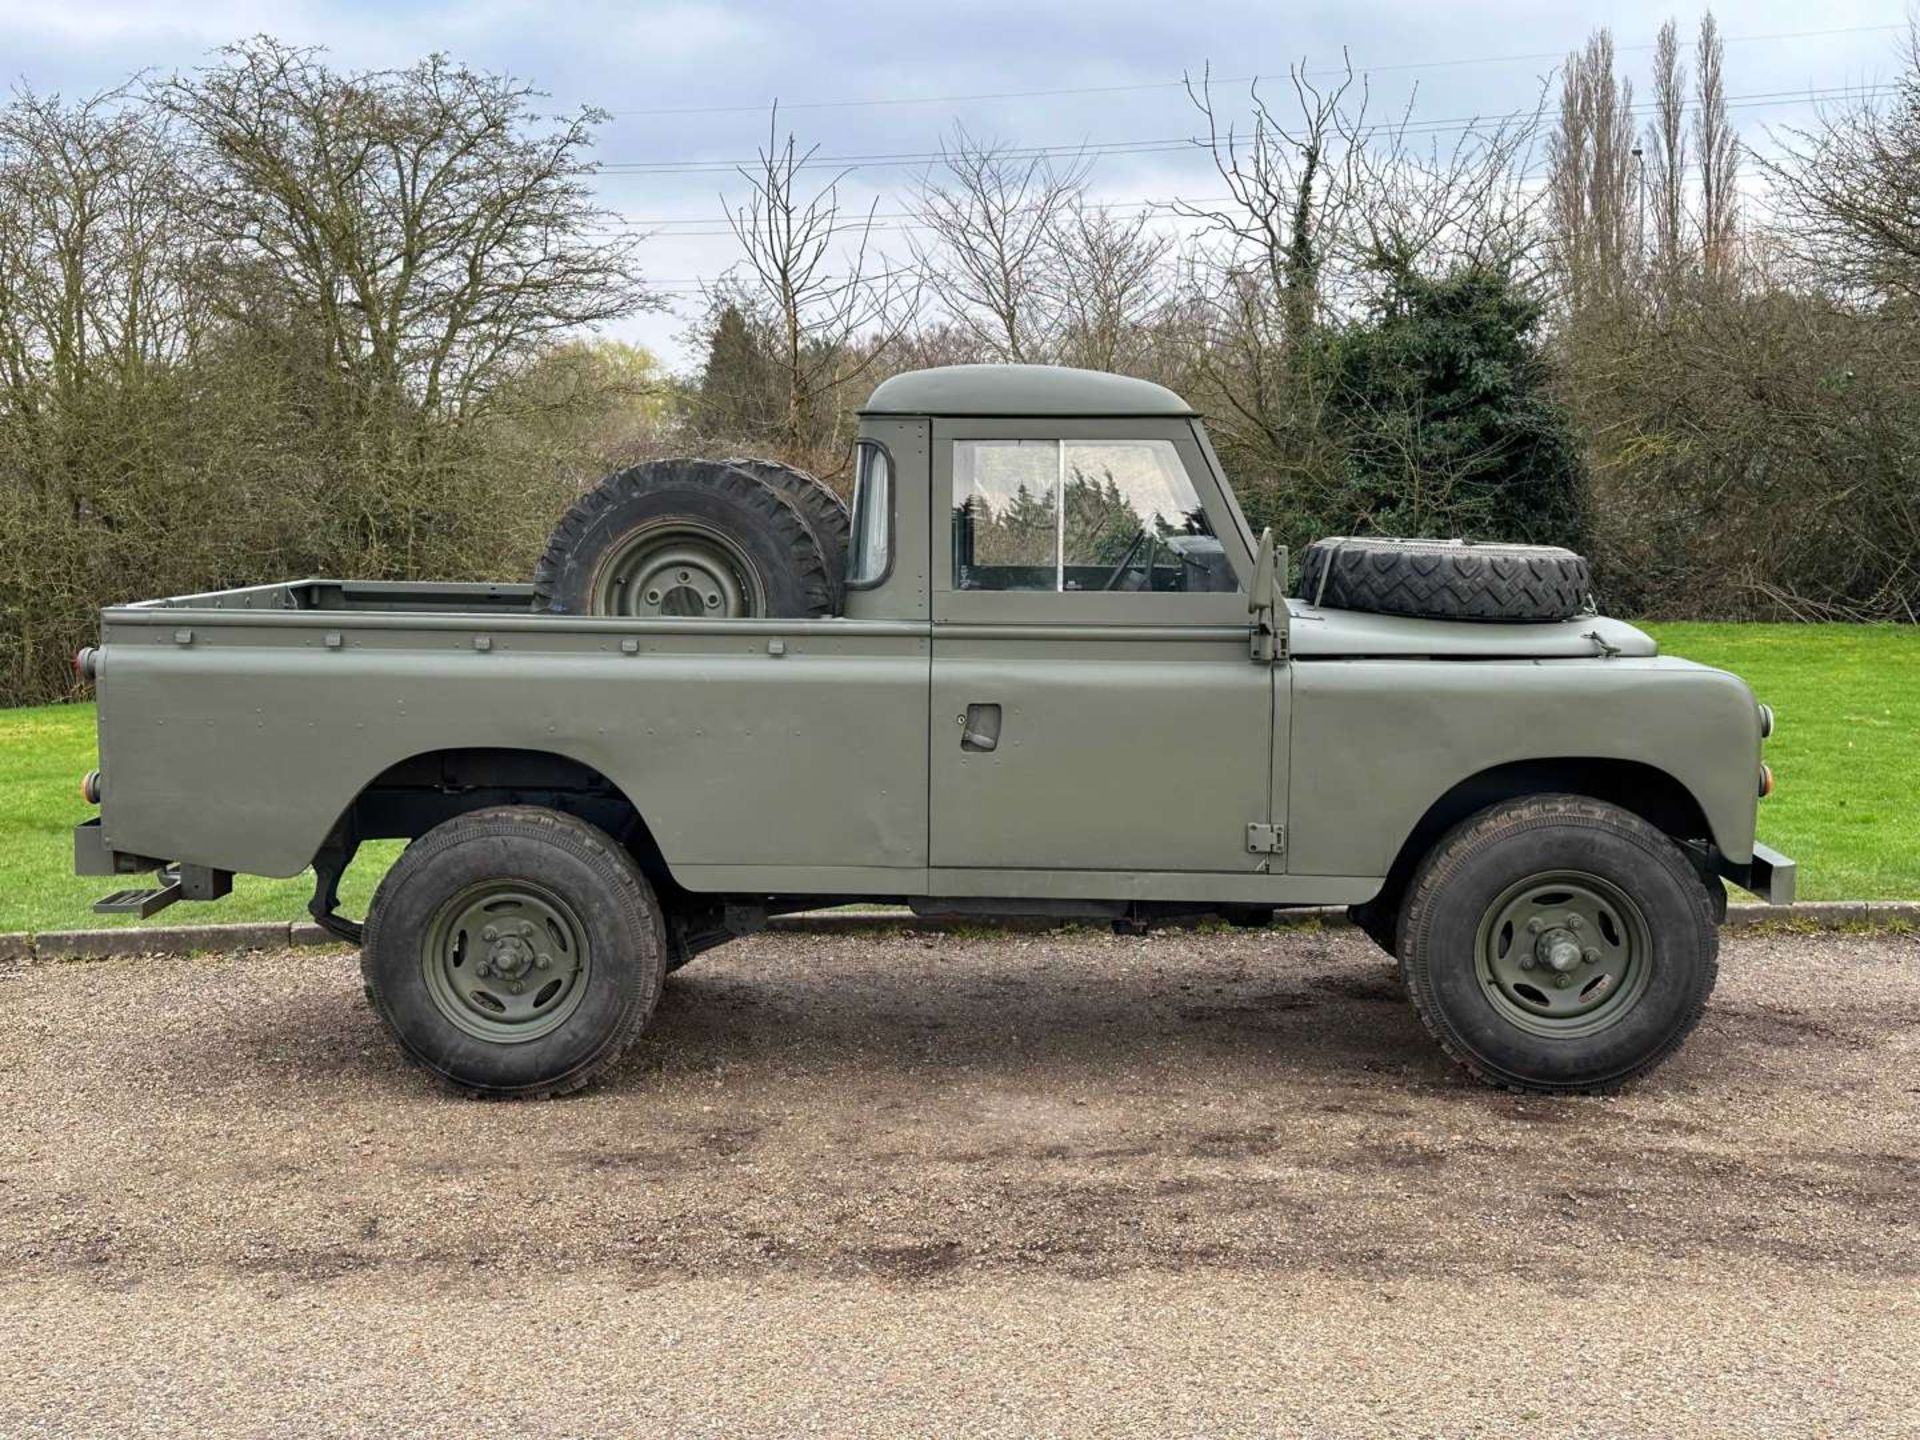 1992 LAND ROVER SERIES III PICK-UP - Image 8 of 25